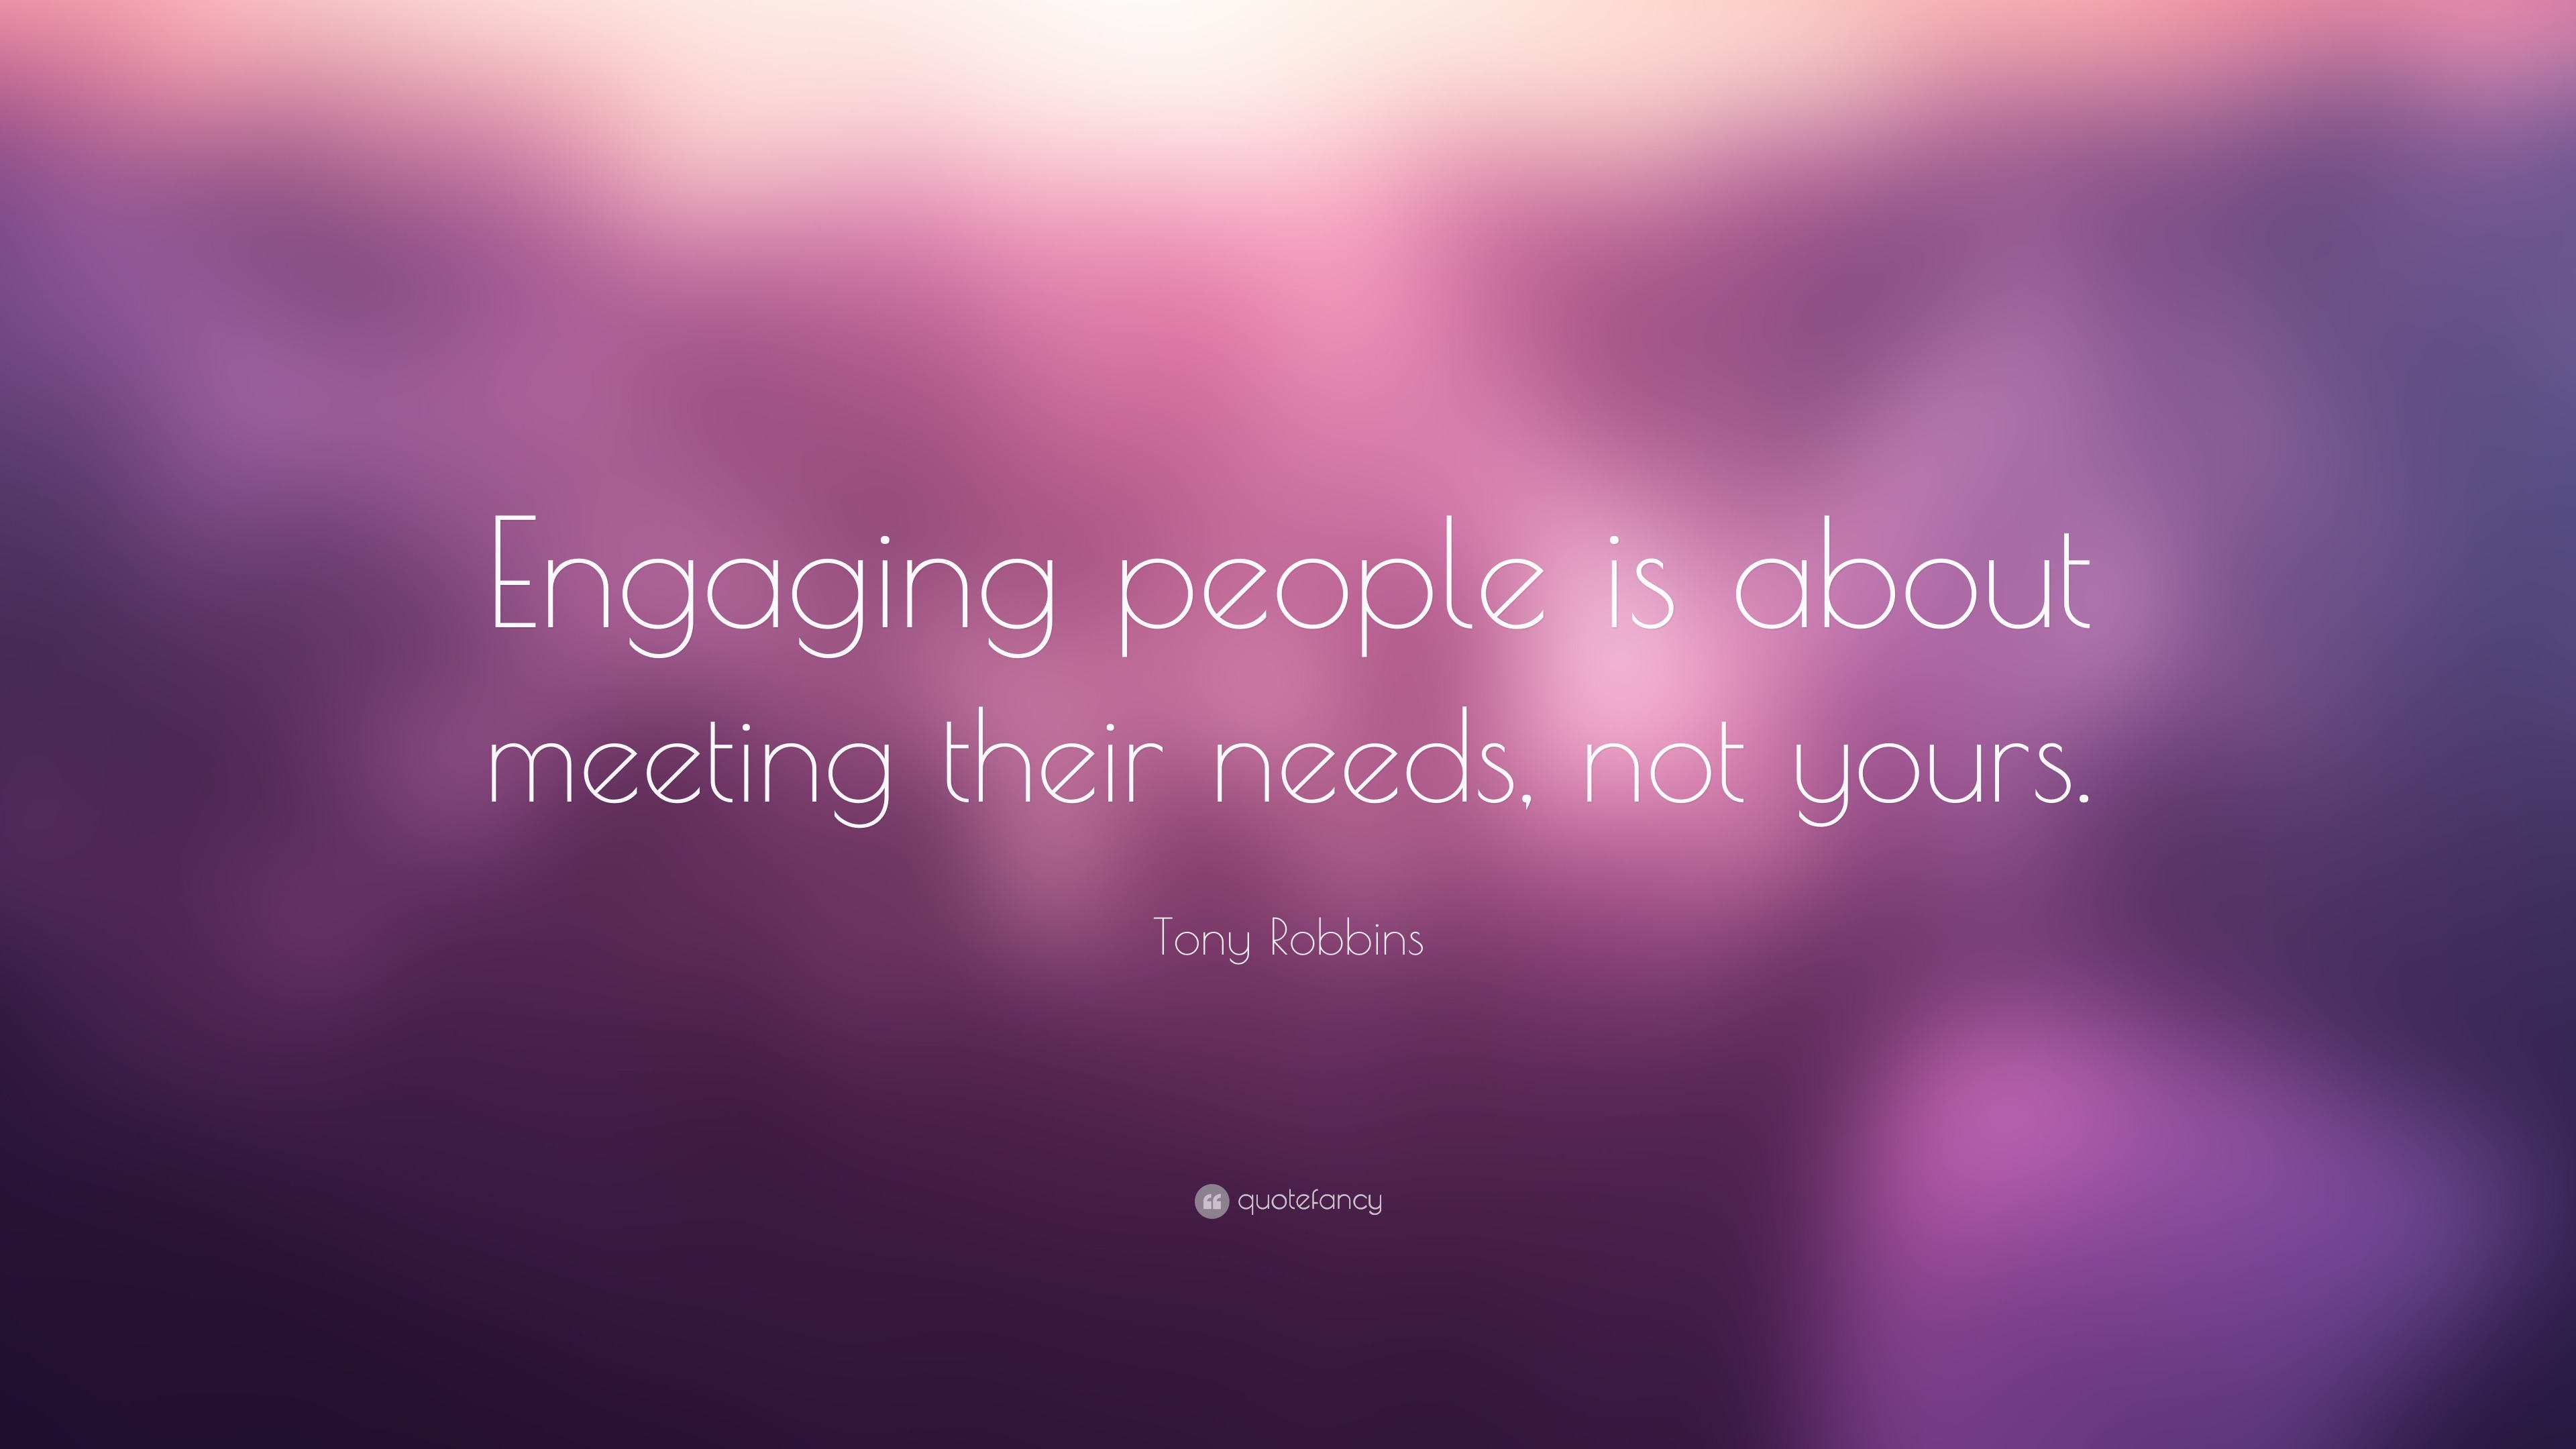 Tony Robbins Quote: “Engaging people is about meeting their needs, not